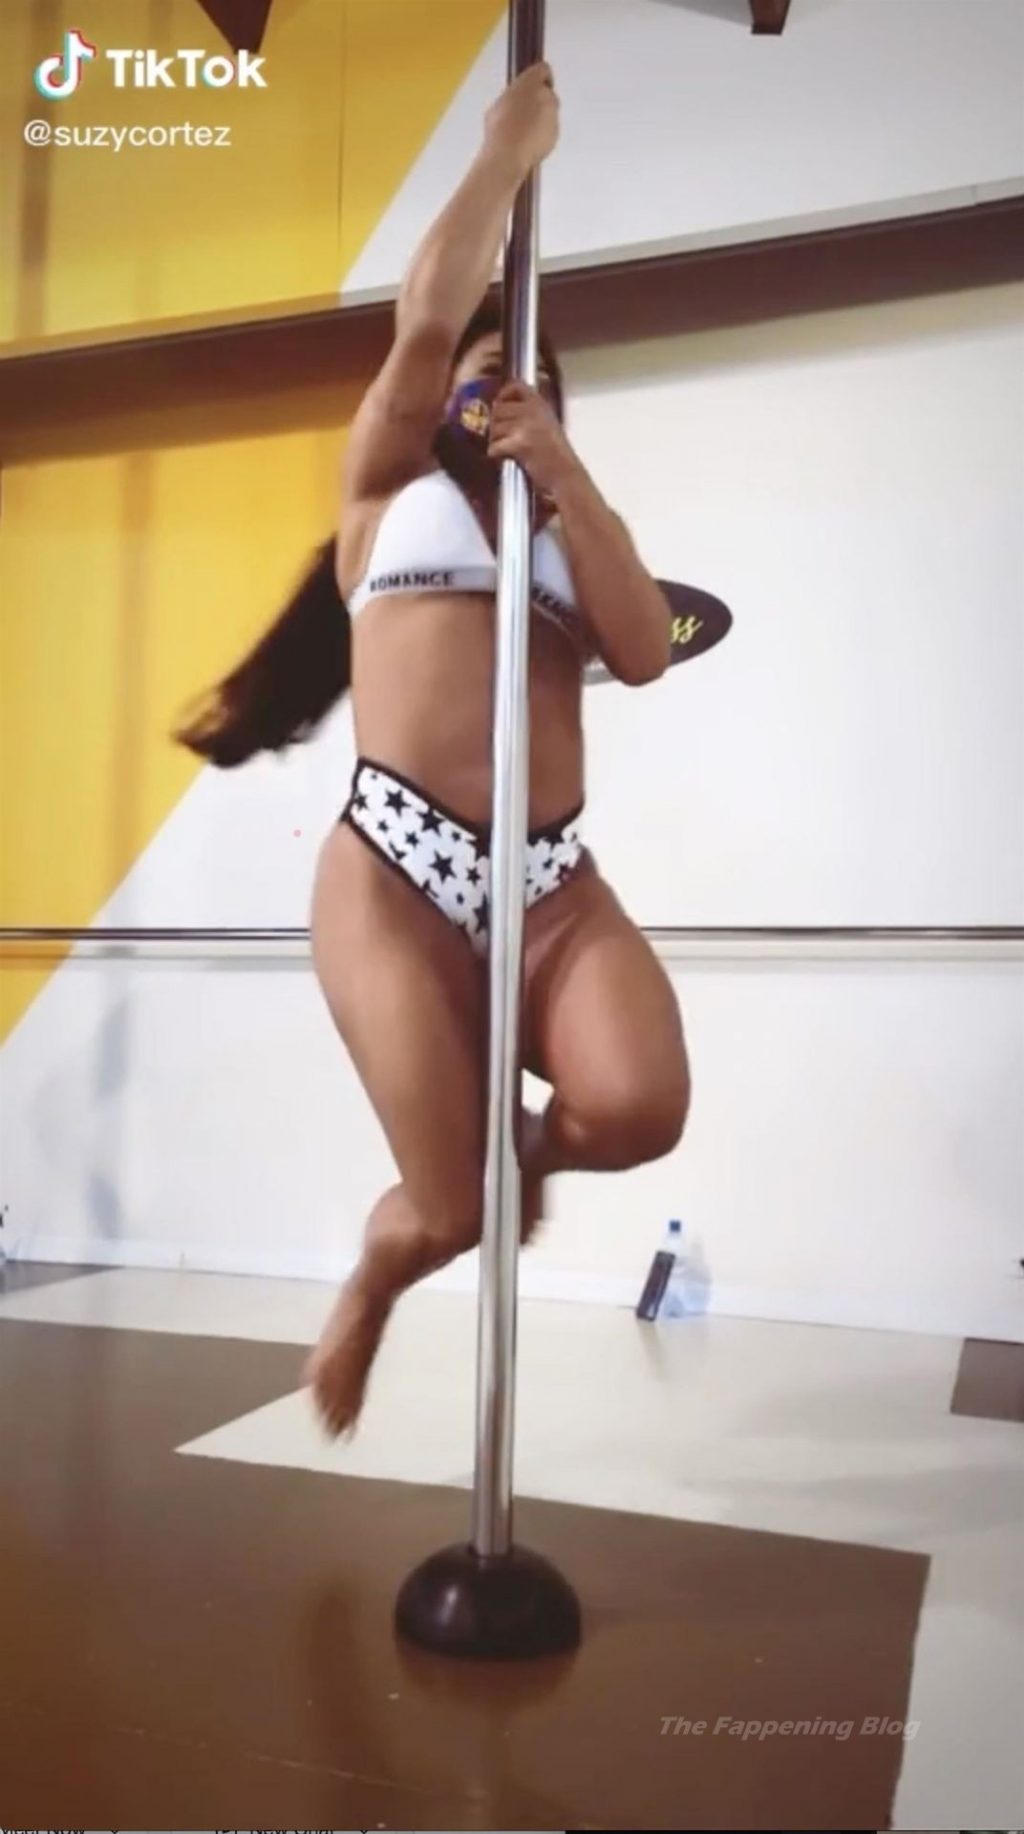 Suzy Cortez Gets the Pulses Racing with a Sexy Display on a Pole (11 Pics + Video)